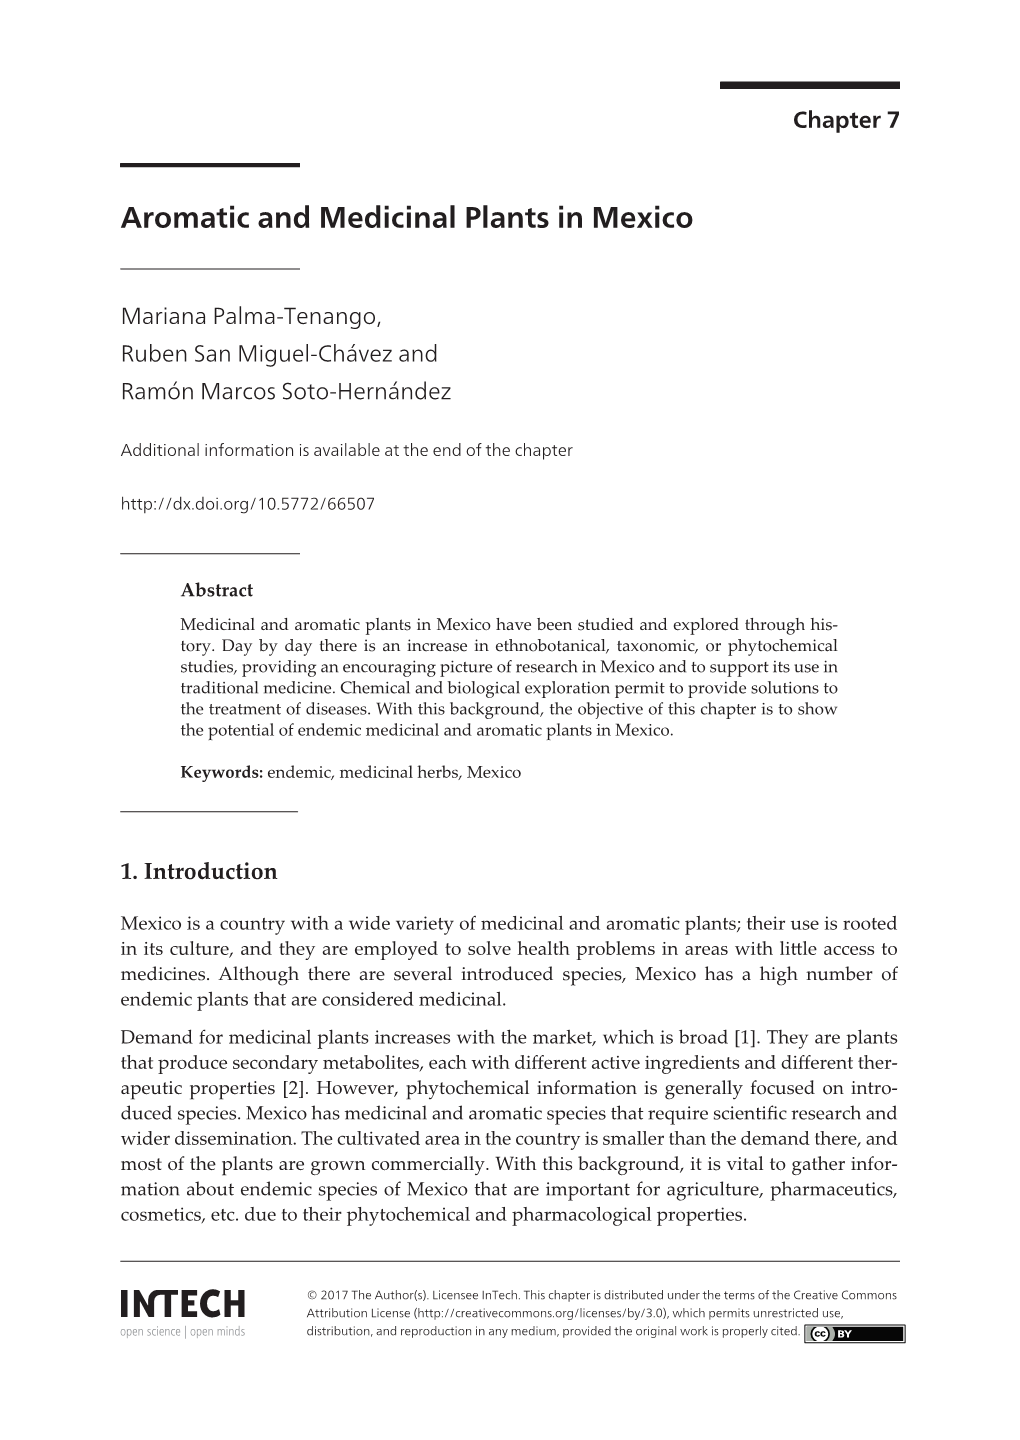 Aromatic and Medicinal Plants in Mexico Aromatic and Medicinal Plants in Mexico